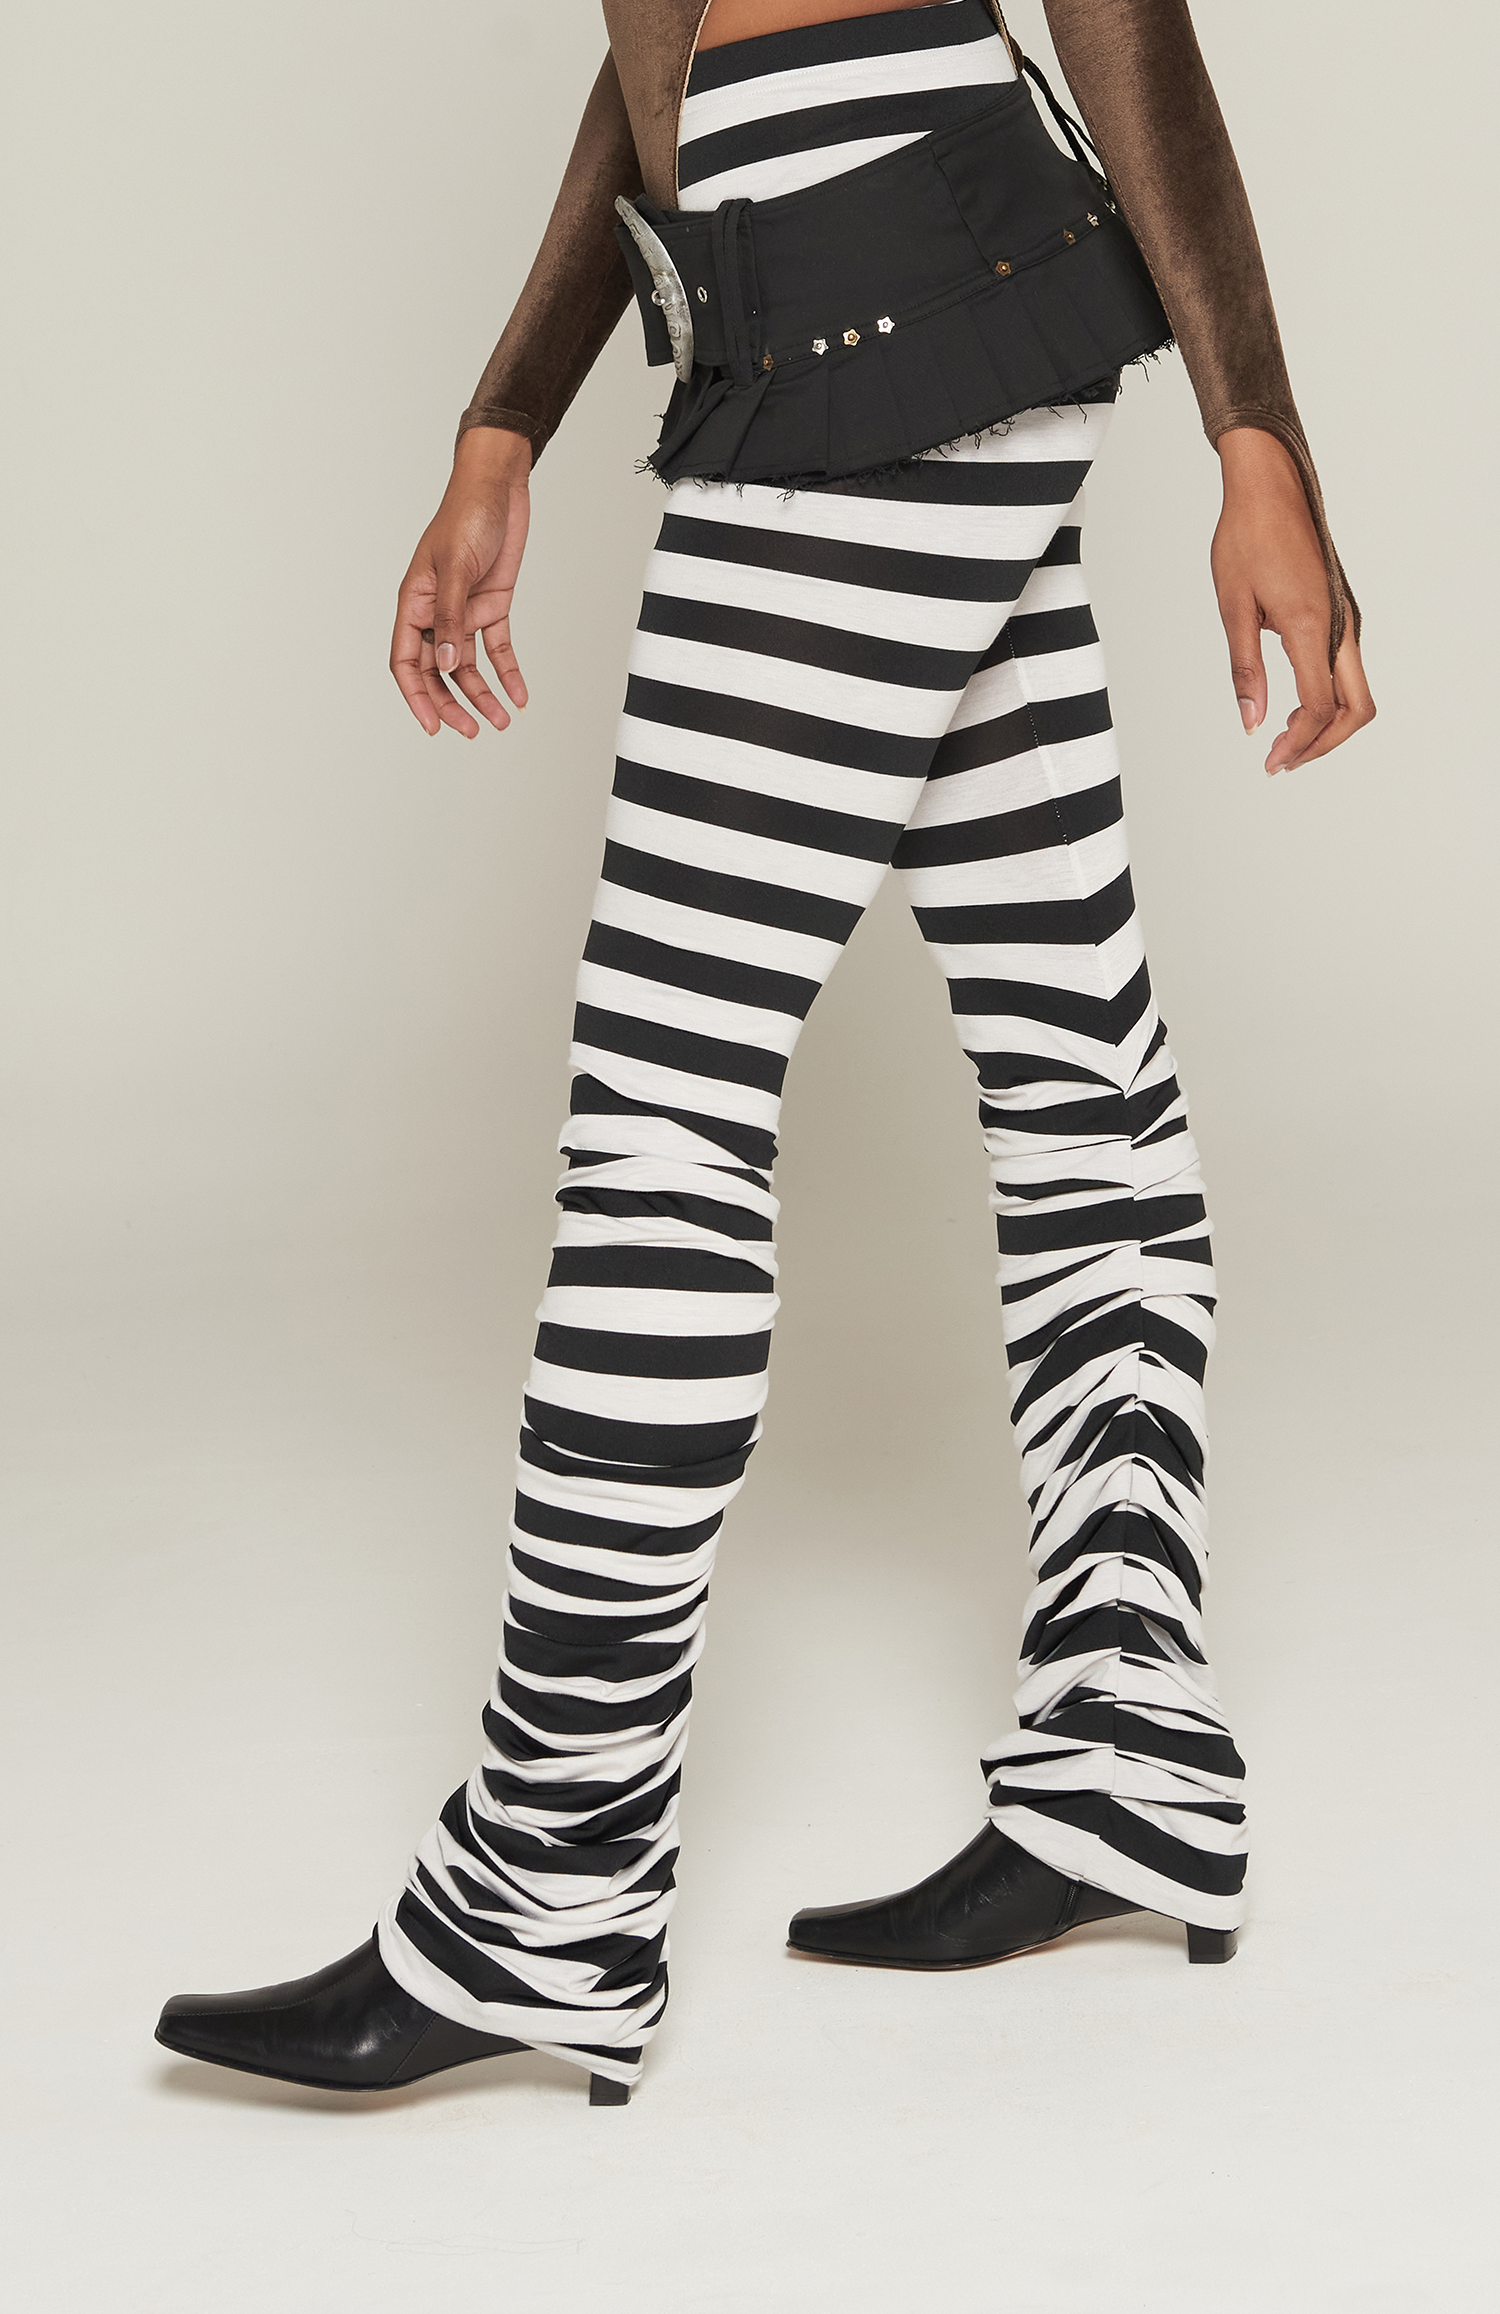  Black and White Stripe Stretchy Tights - Adult